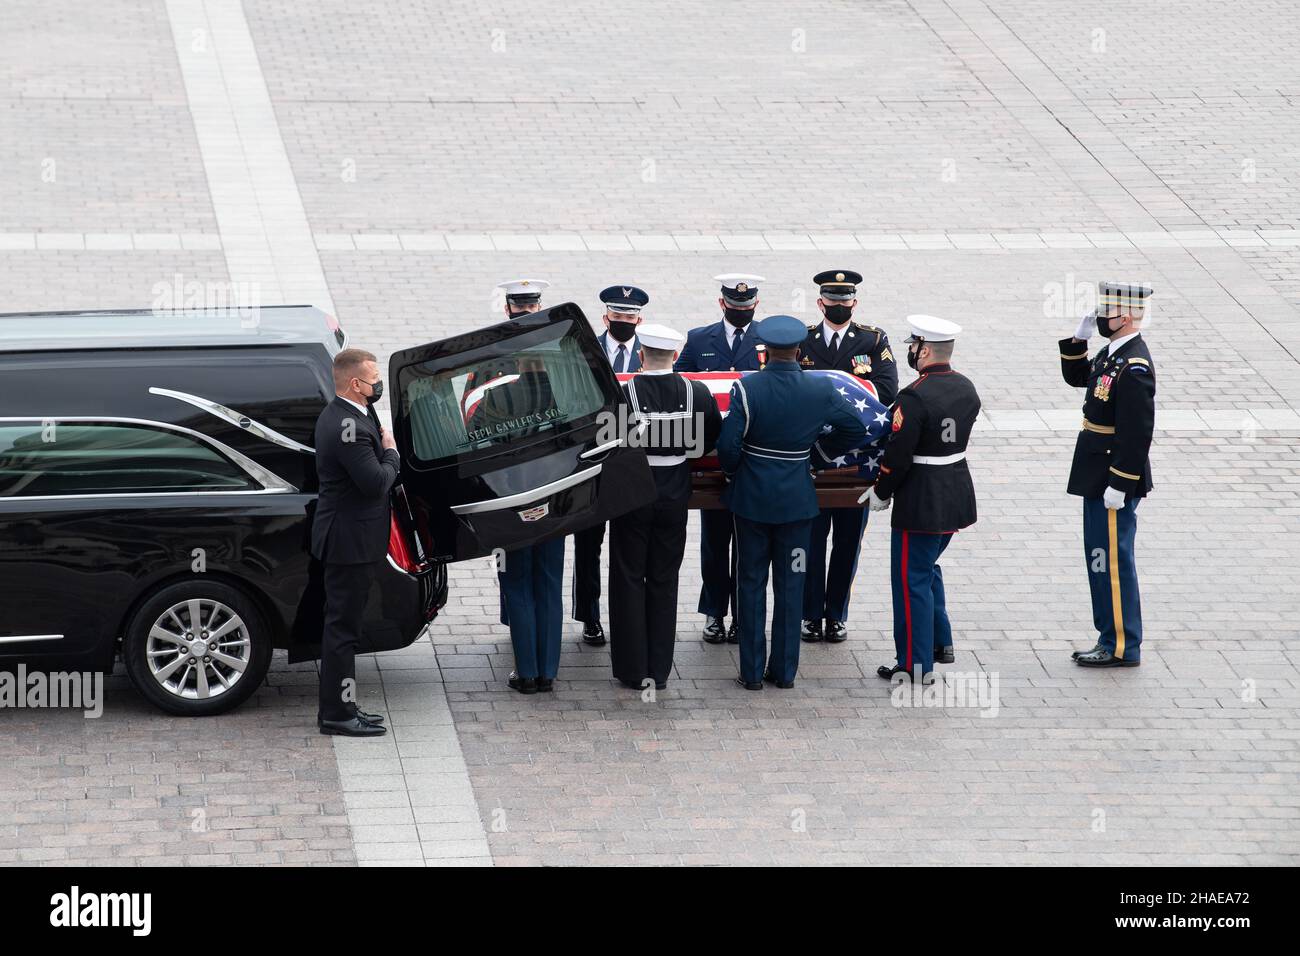 Washington, United States Of America. 10th Dec, 2021. Washington, United States of America. 10 December, 2021. An Armed Forces honor guard place the flag-draped casket of World War II veteran and former Senator Robert Dole into a hearse outside the U.S. Capitol, December 10, 2021 in Washington, DC Senator Dole died at age 98 following a lifetime of service to the nation. Credit: Sgt. Kevin M. Roy/U.S. Army/Alamy Live News Stock Photo